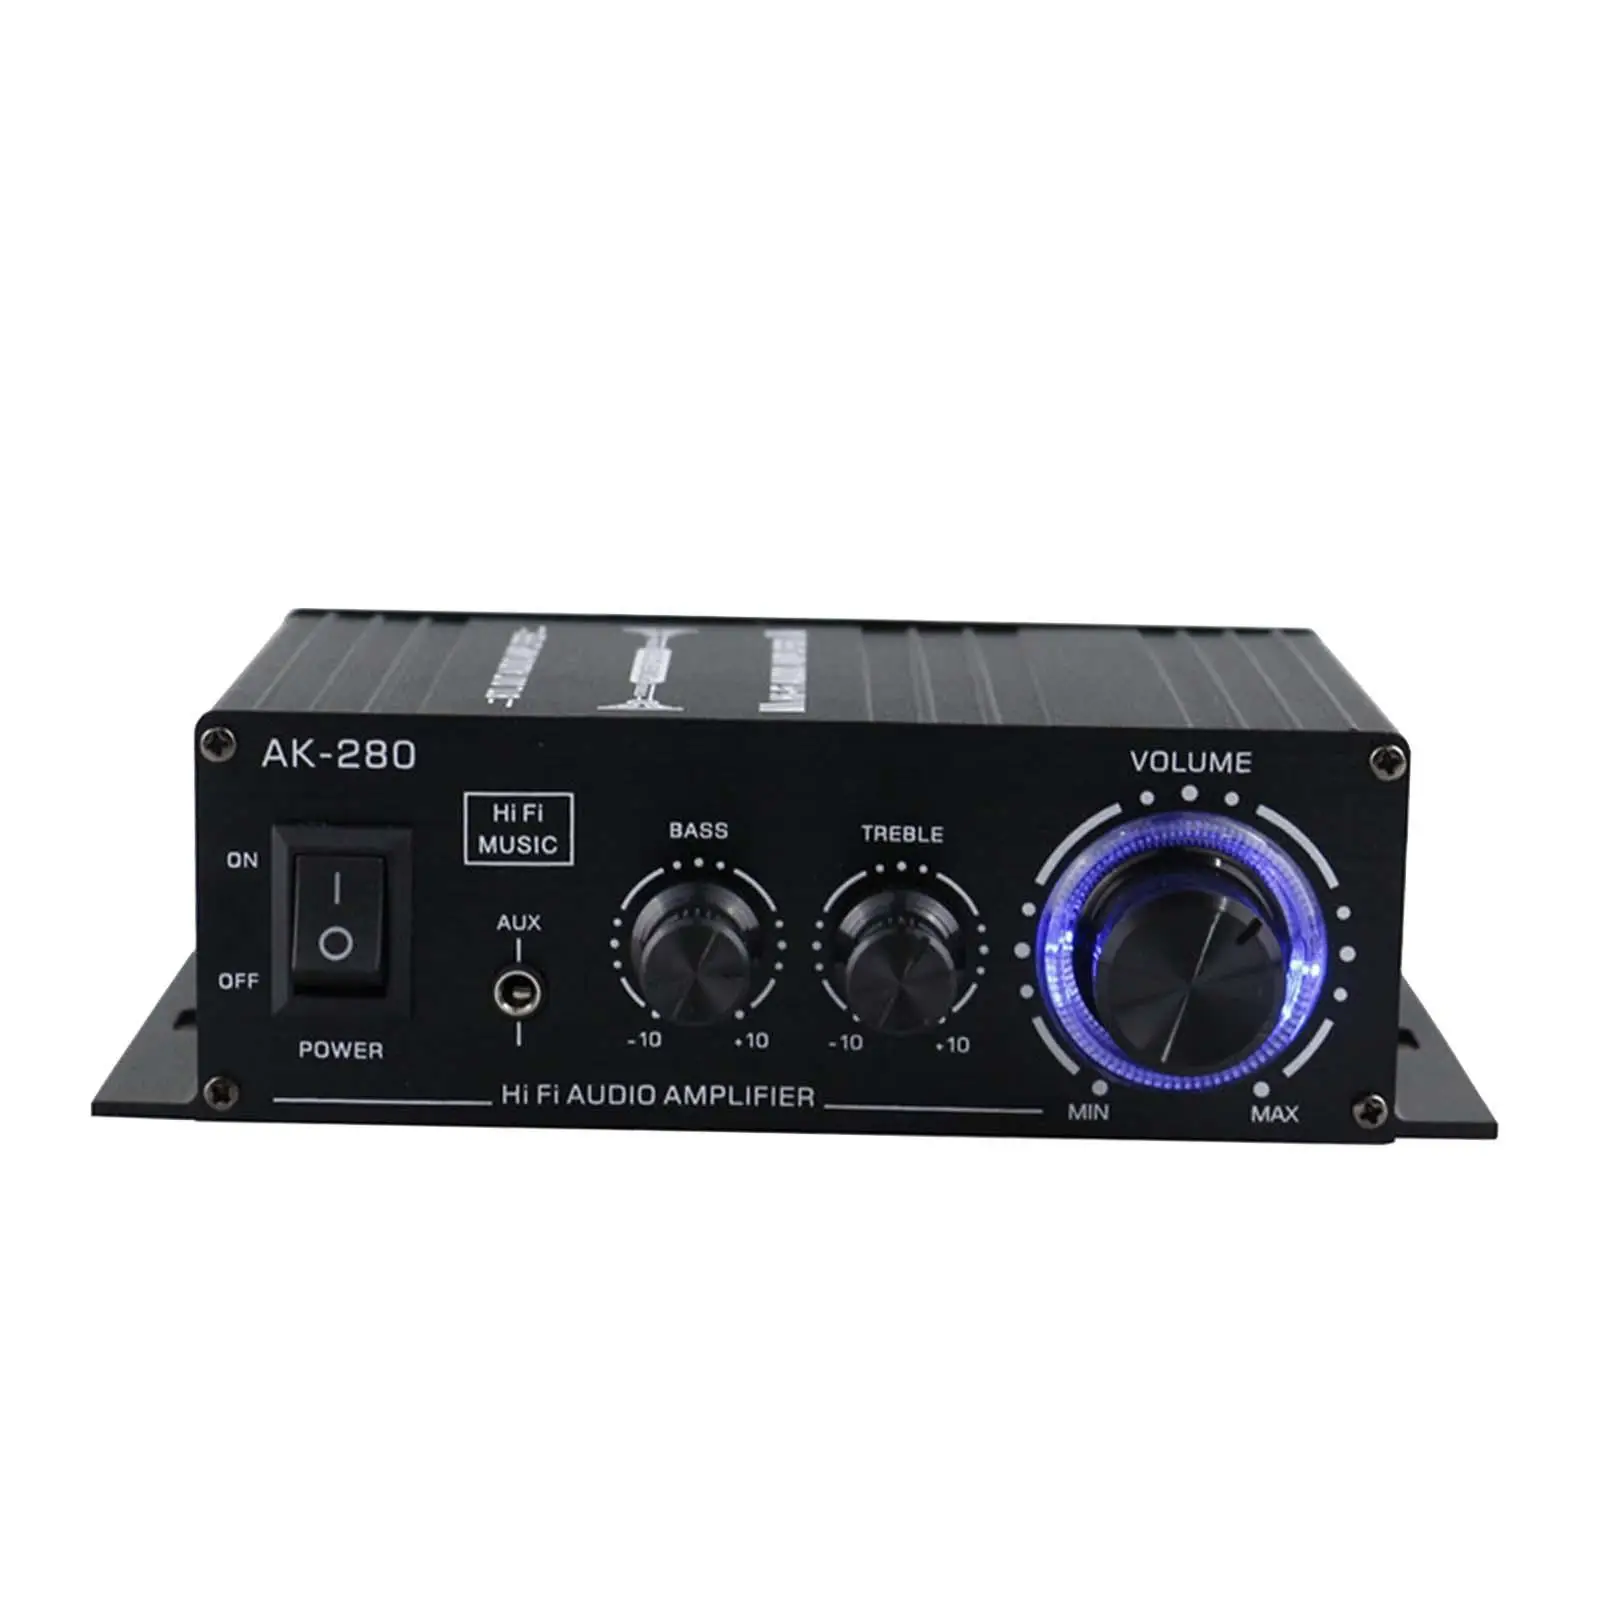 AK-280 Stereo Audio Power Amplifier 2 Channel Output 40W+40W with Blue Light Stereo Amplifiers Audio Amp for Car Home Bar Party